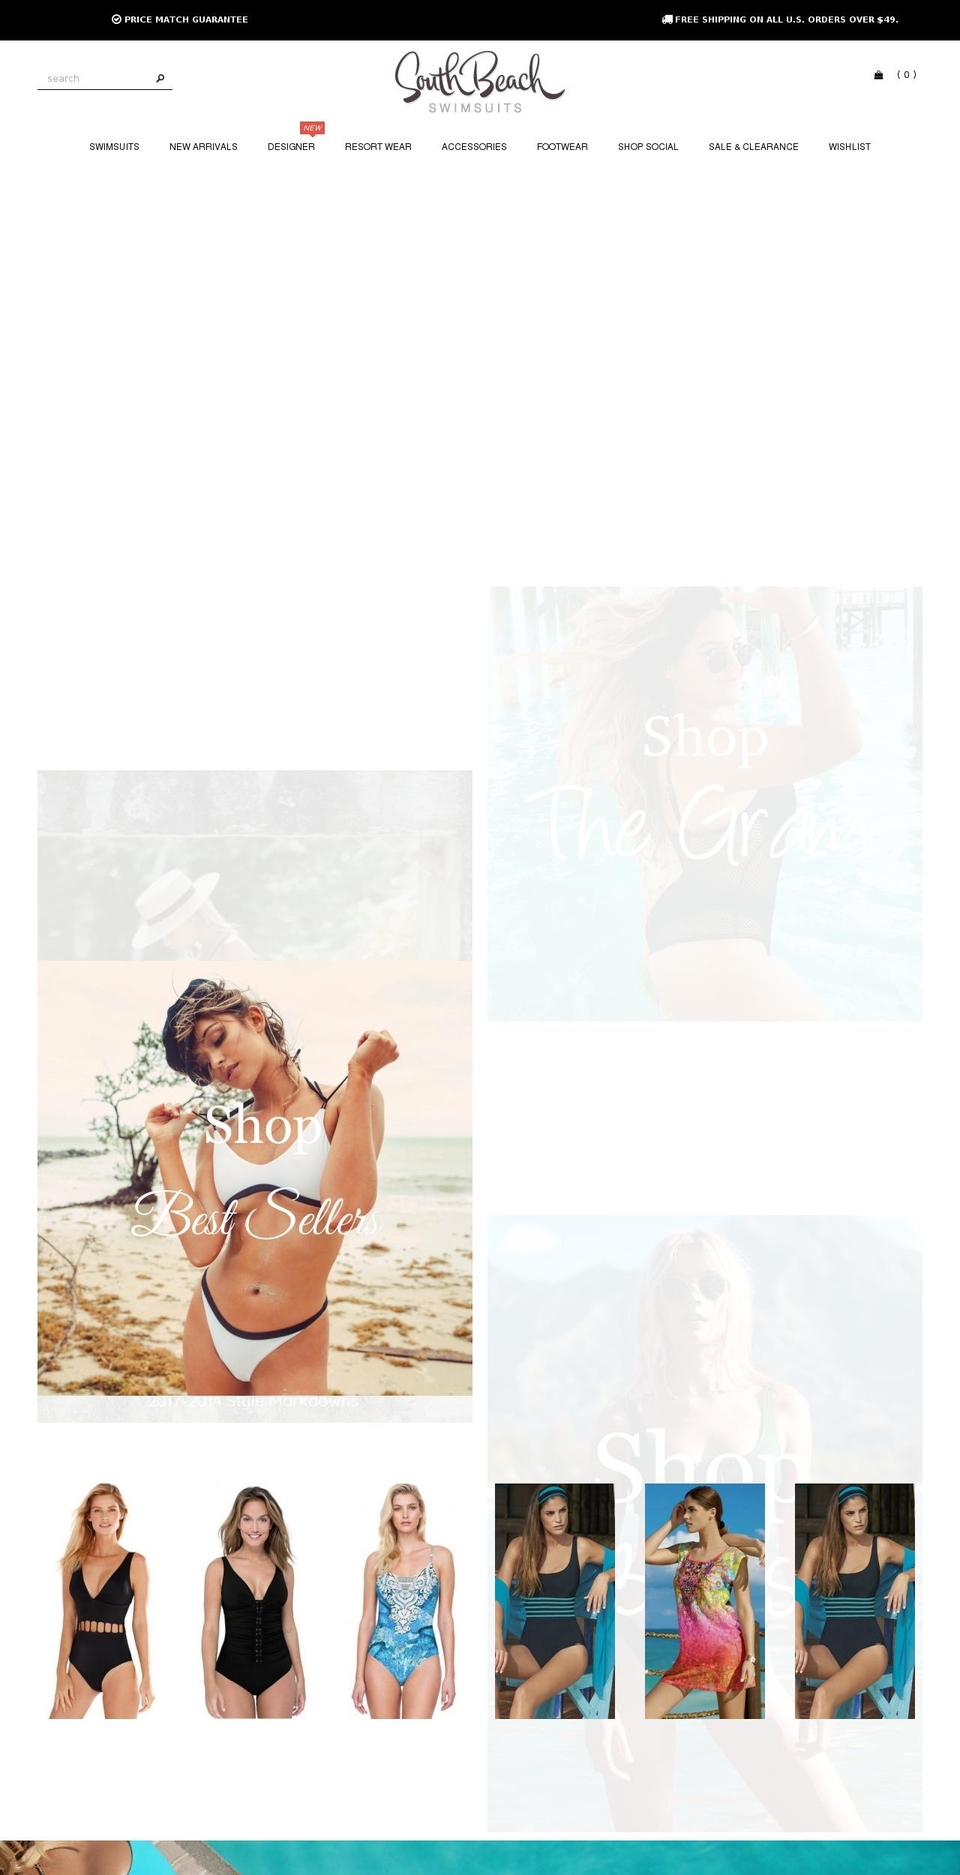 Made With ❤ By Minion Made - Updated Checkout Shopify theme site example asosresortwear.com